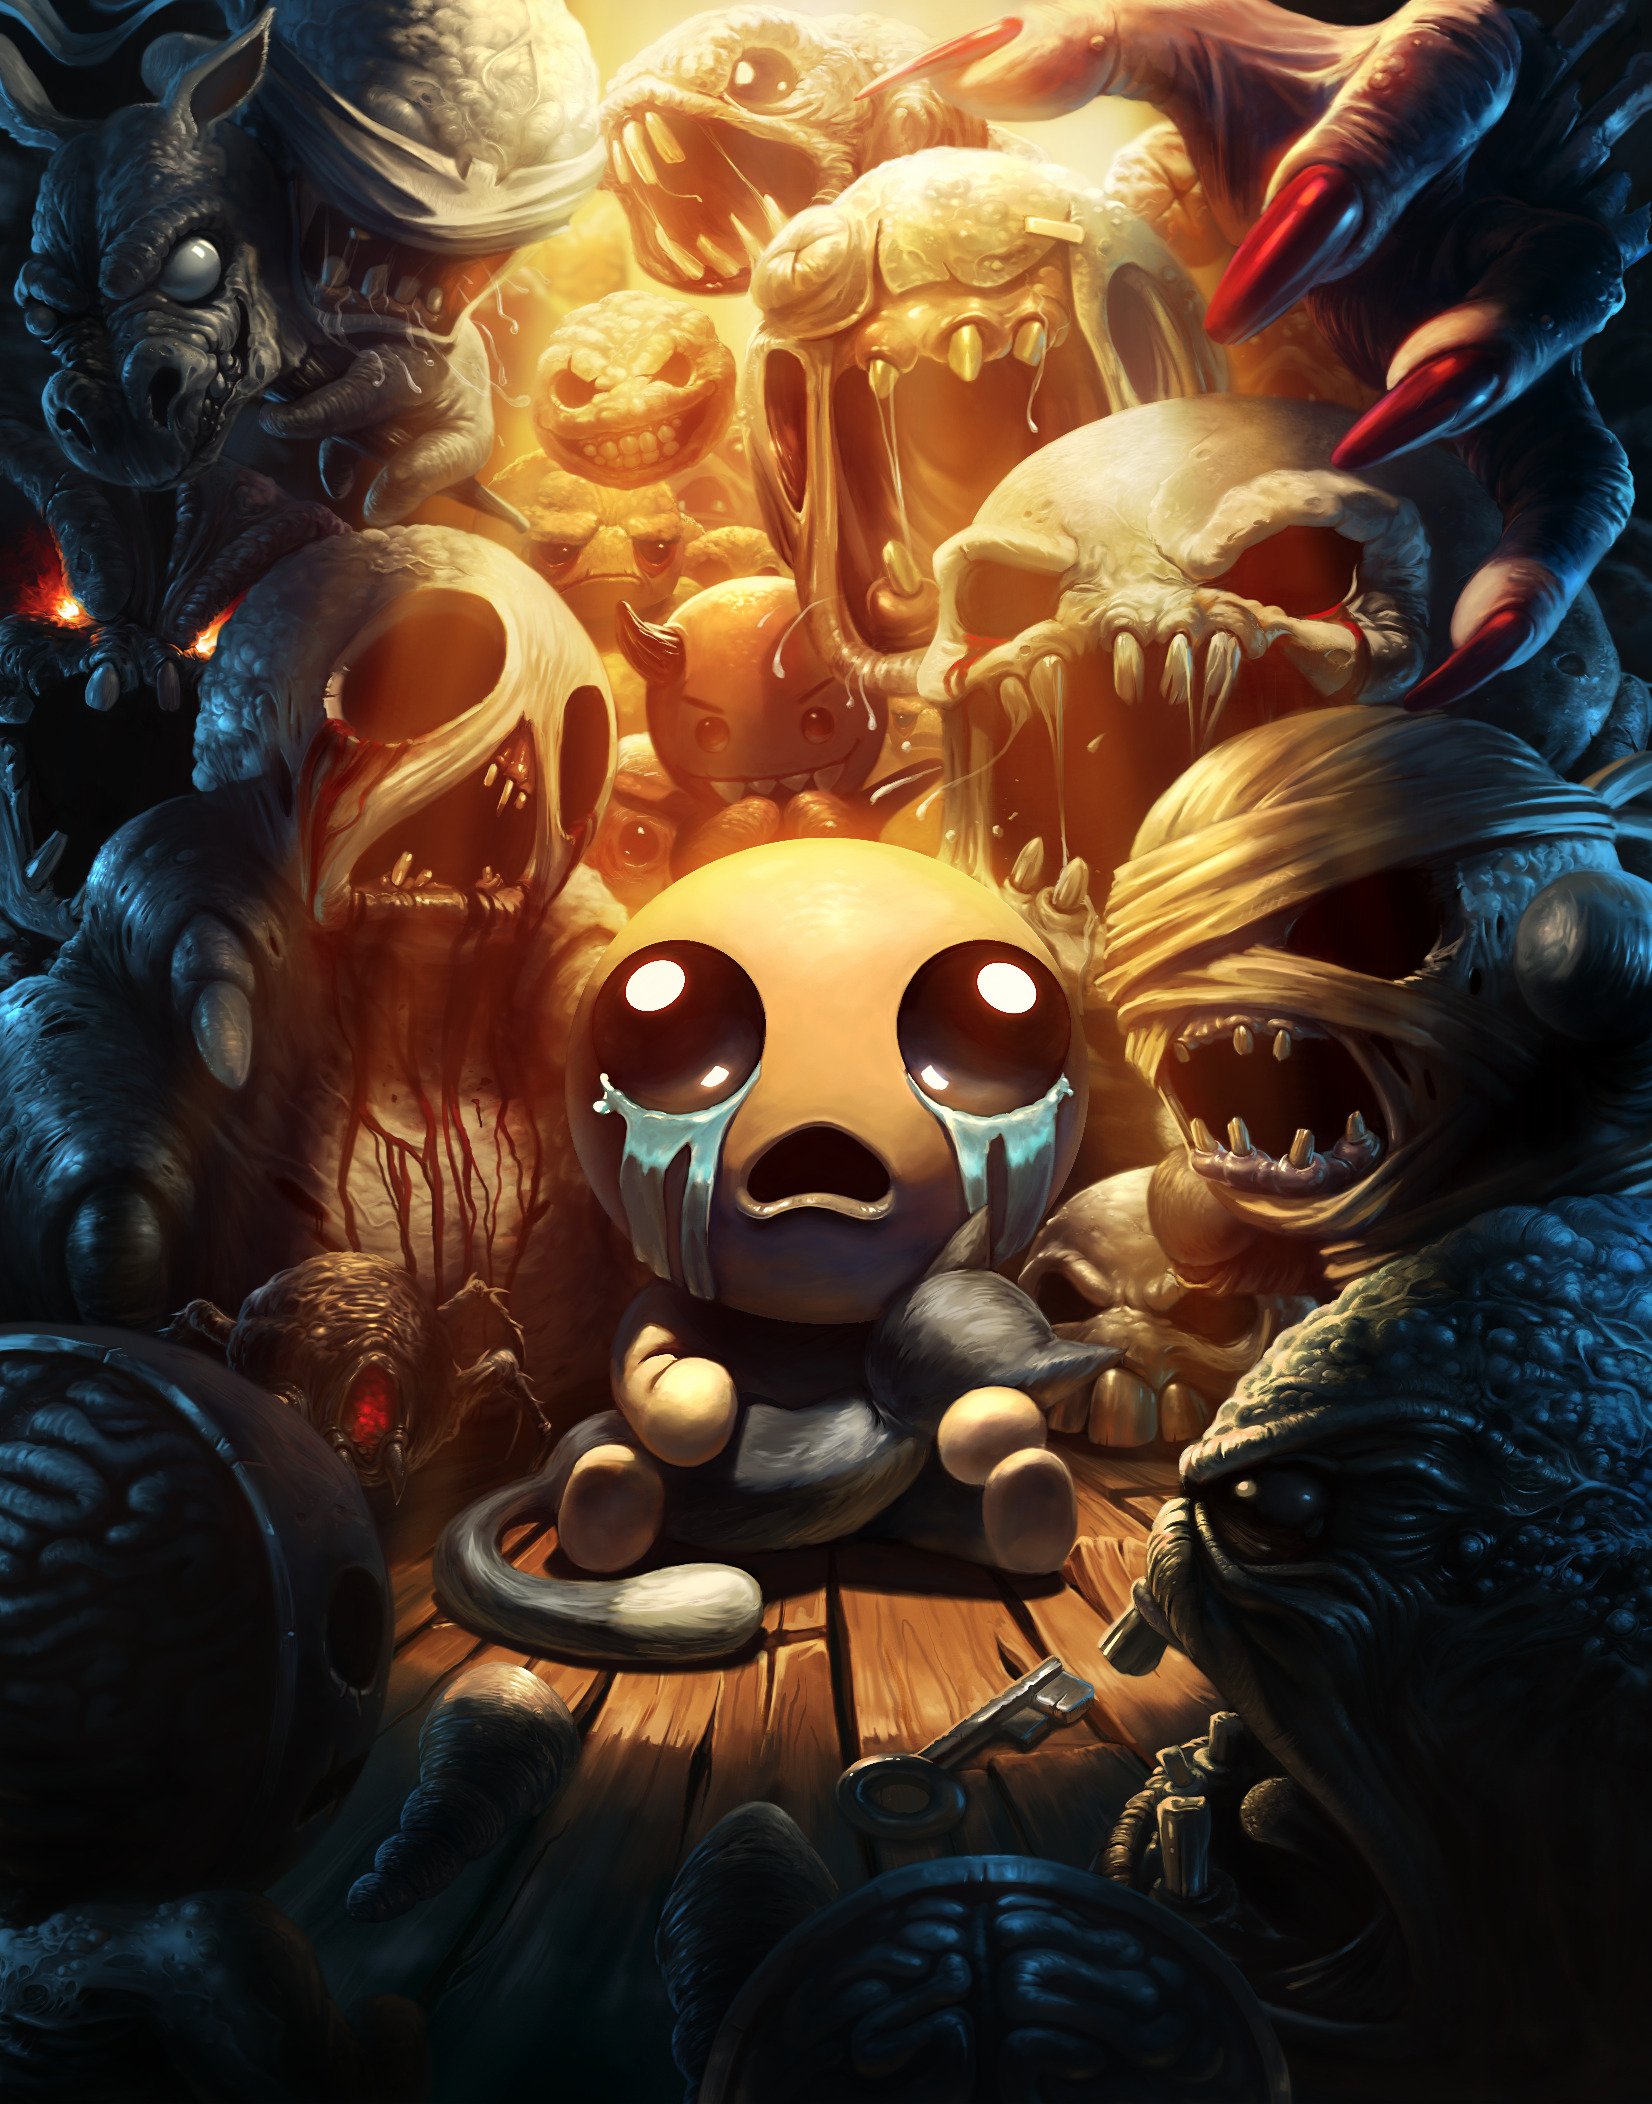 The Binding of Isaac Afterbirth + arrive en boîte chez nous !